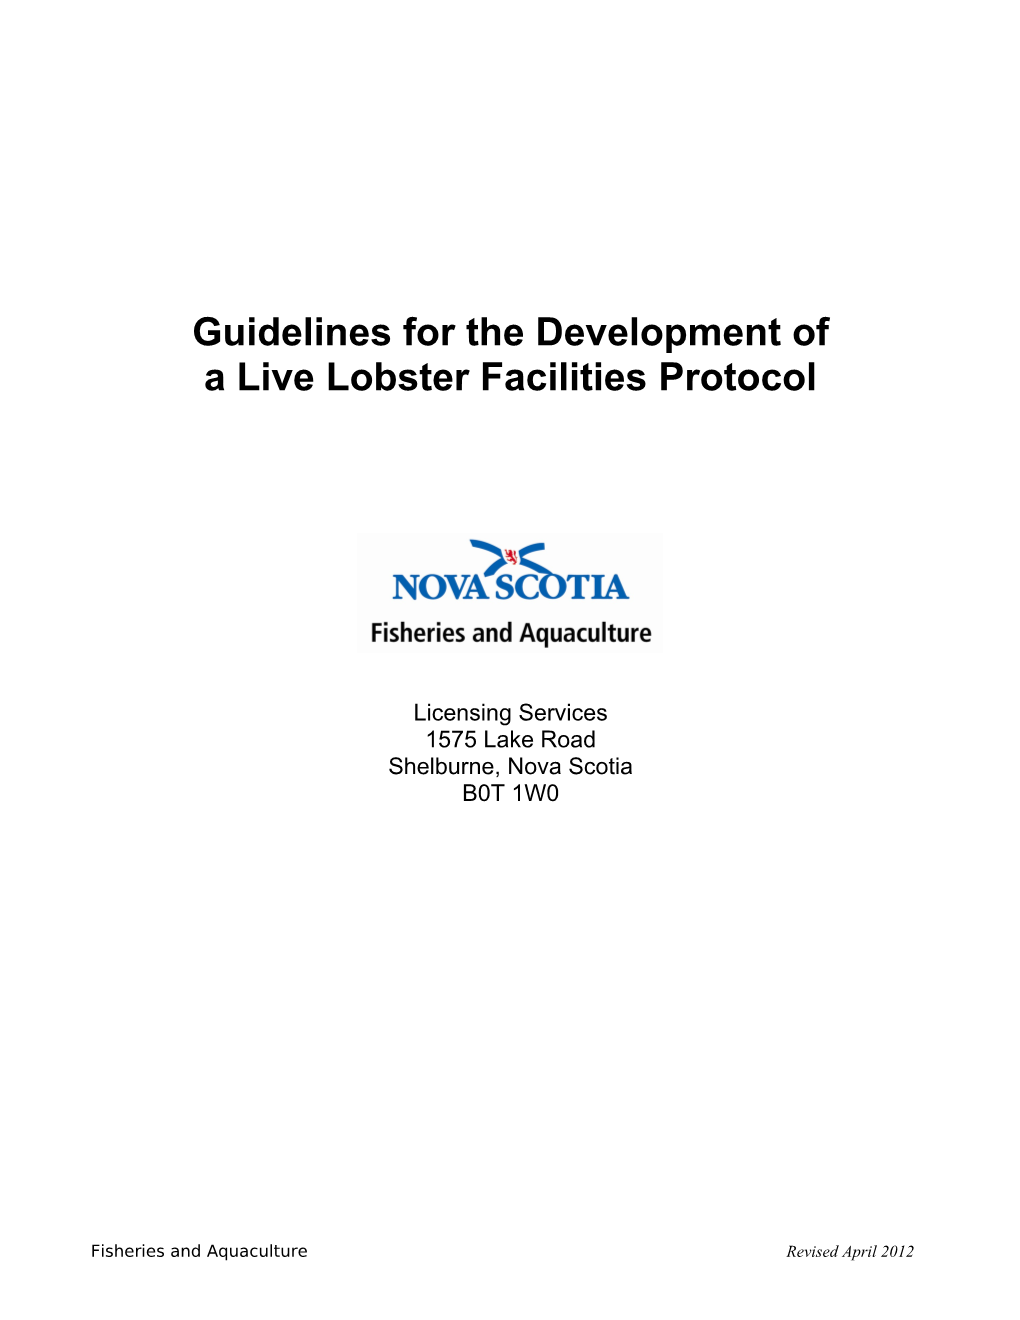 Guidelines for the Development Of